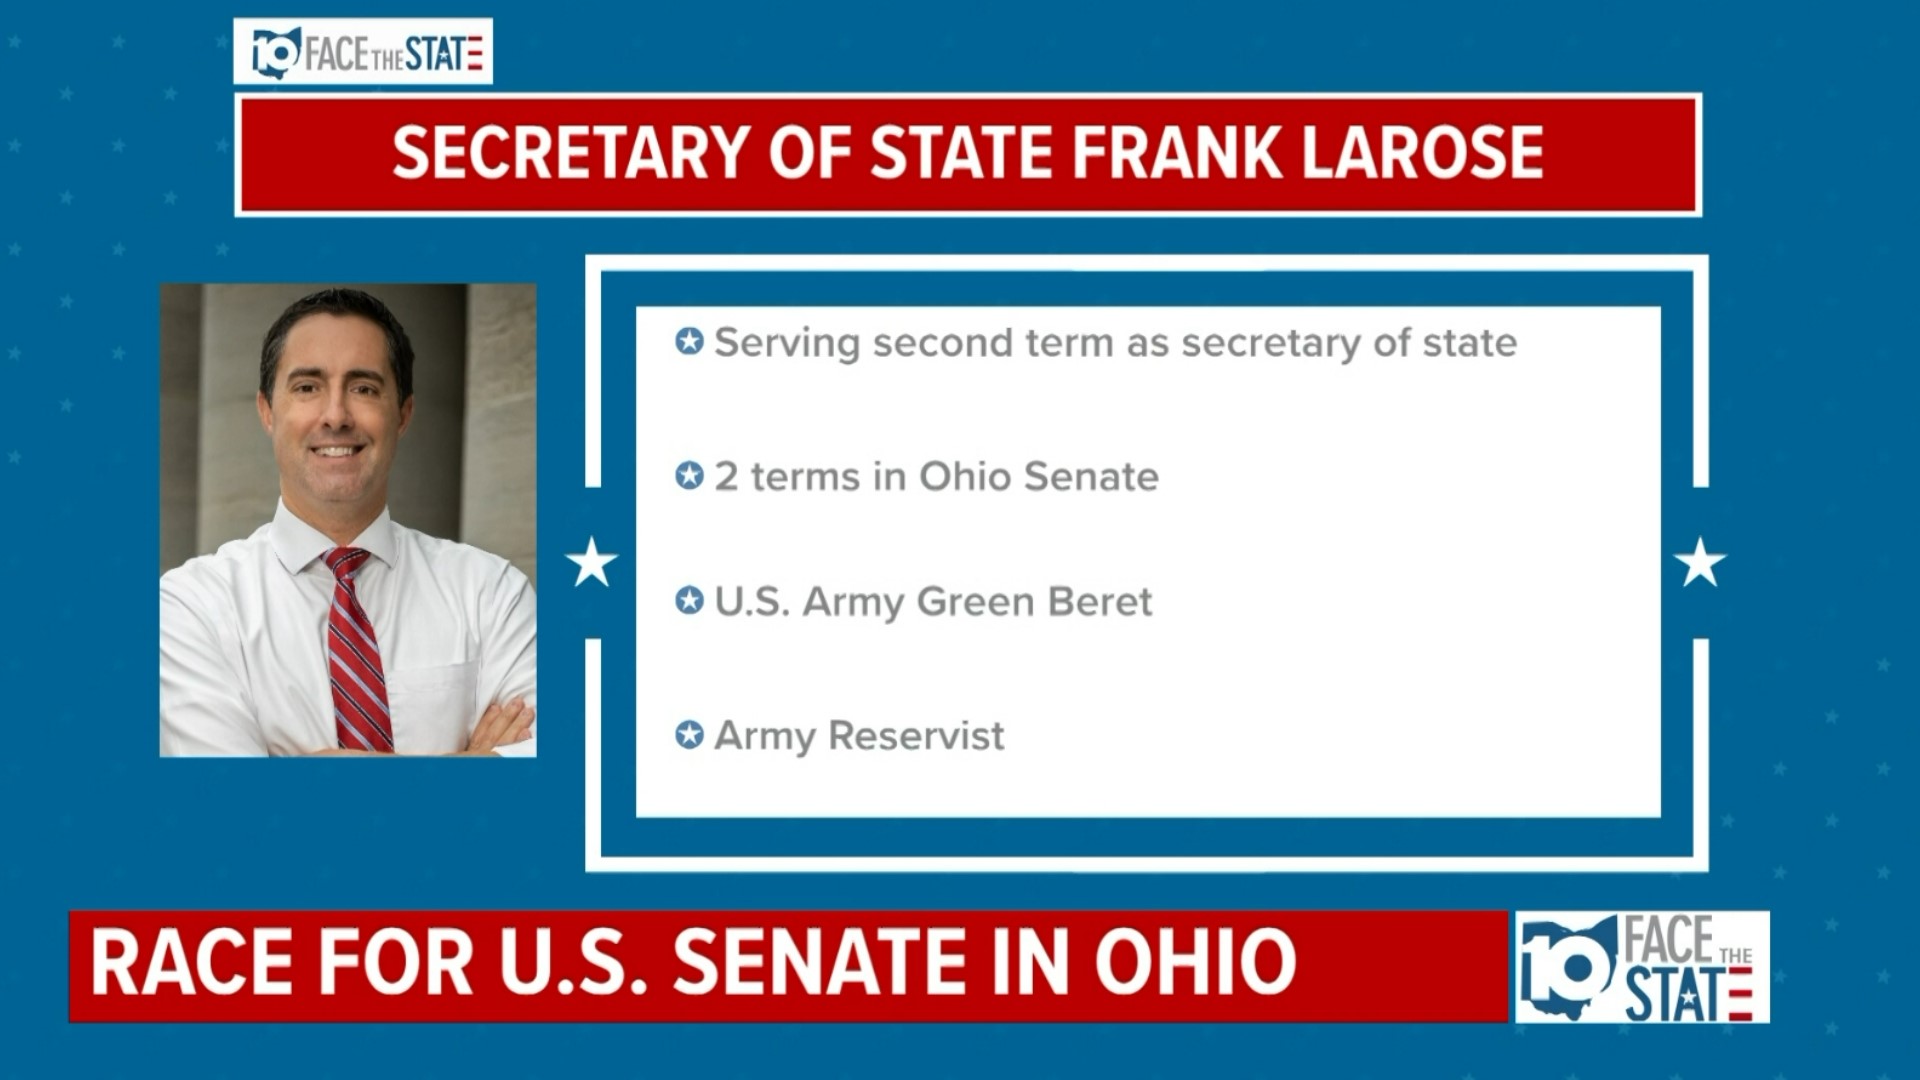 On this week's Face the State, we discuss the Ohio primary election and have a discussion with Republican candidate Frank LaRose.